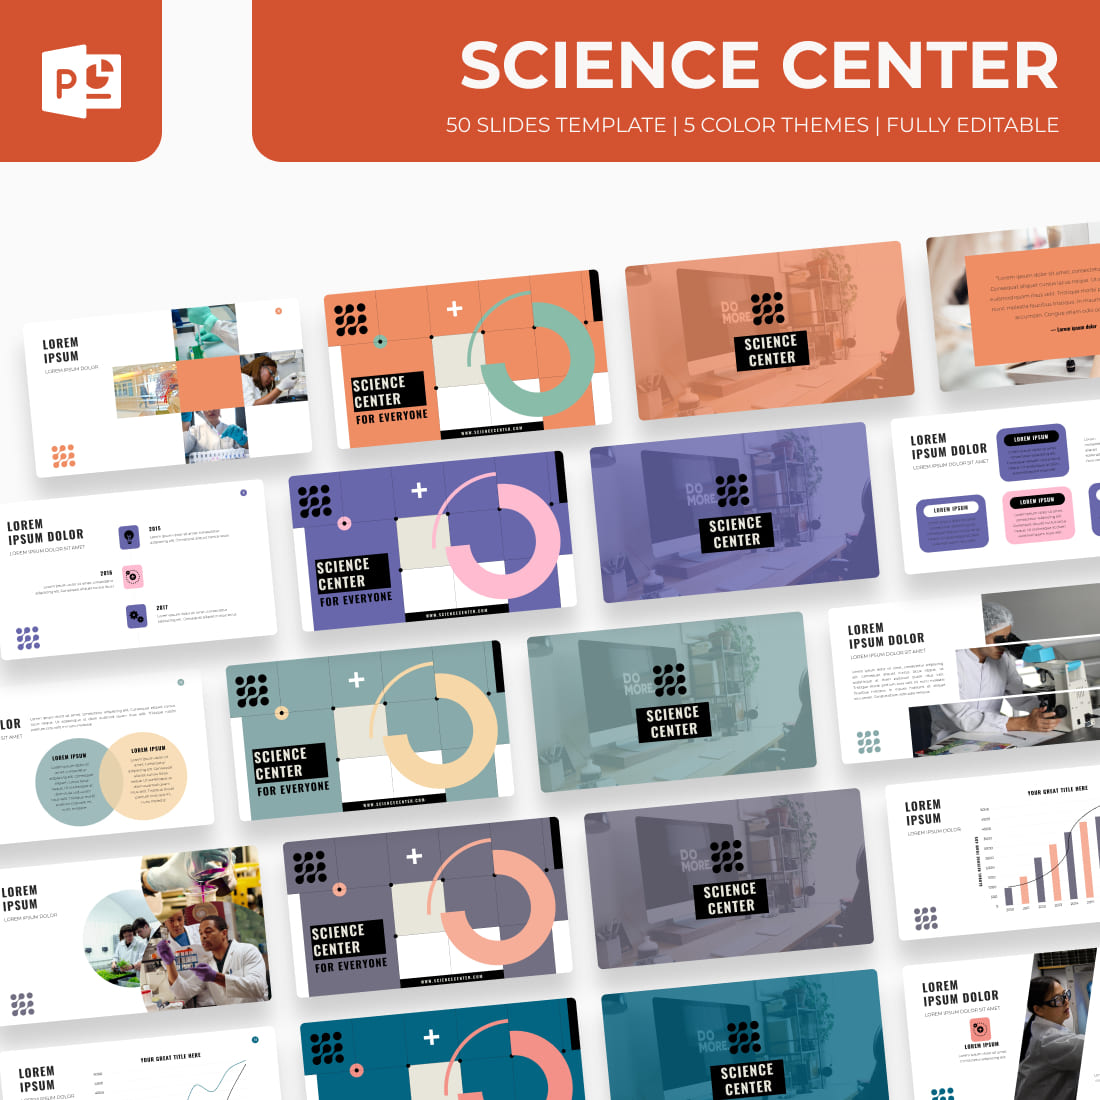 Science Center Powerpoint Template.